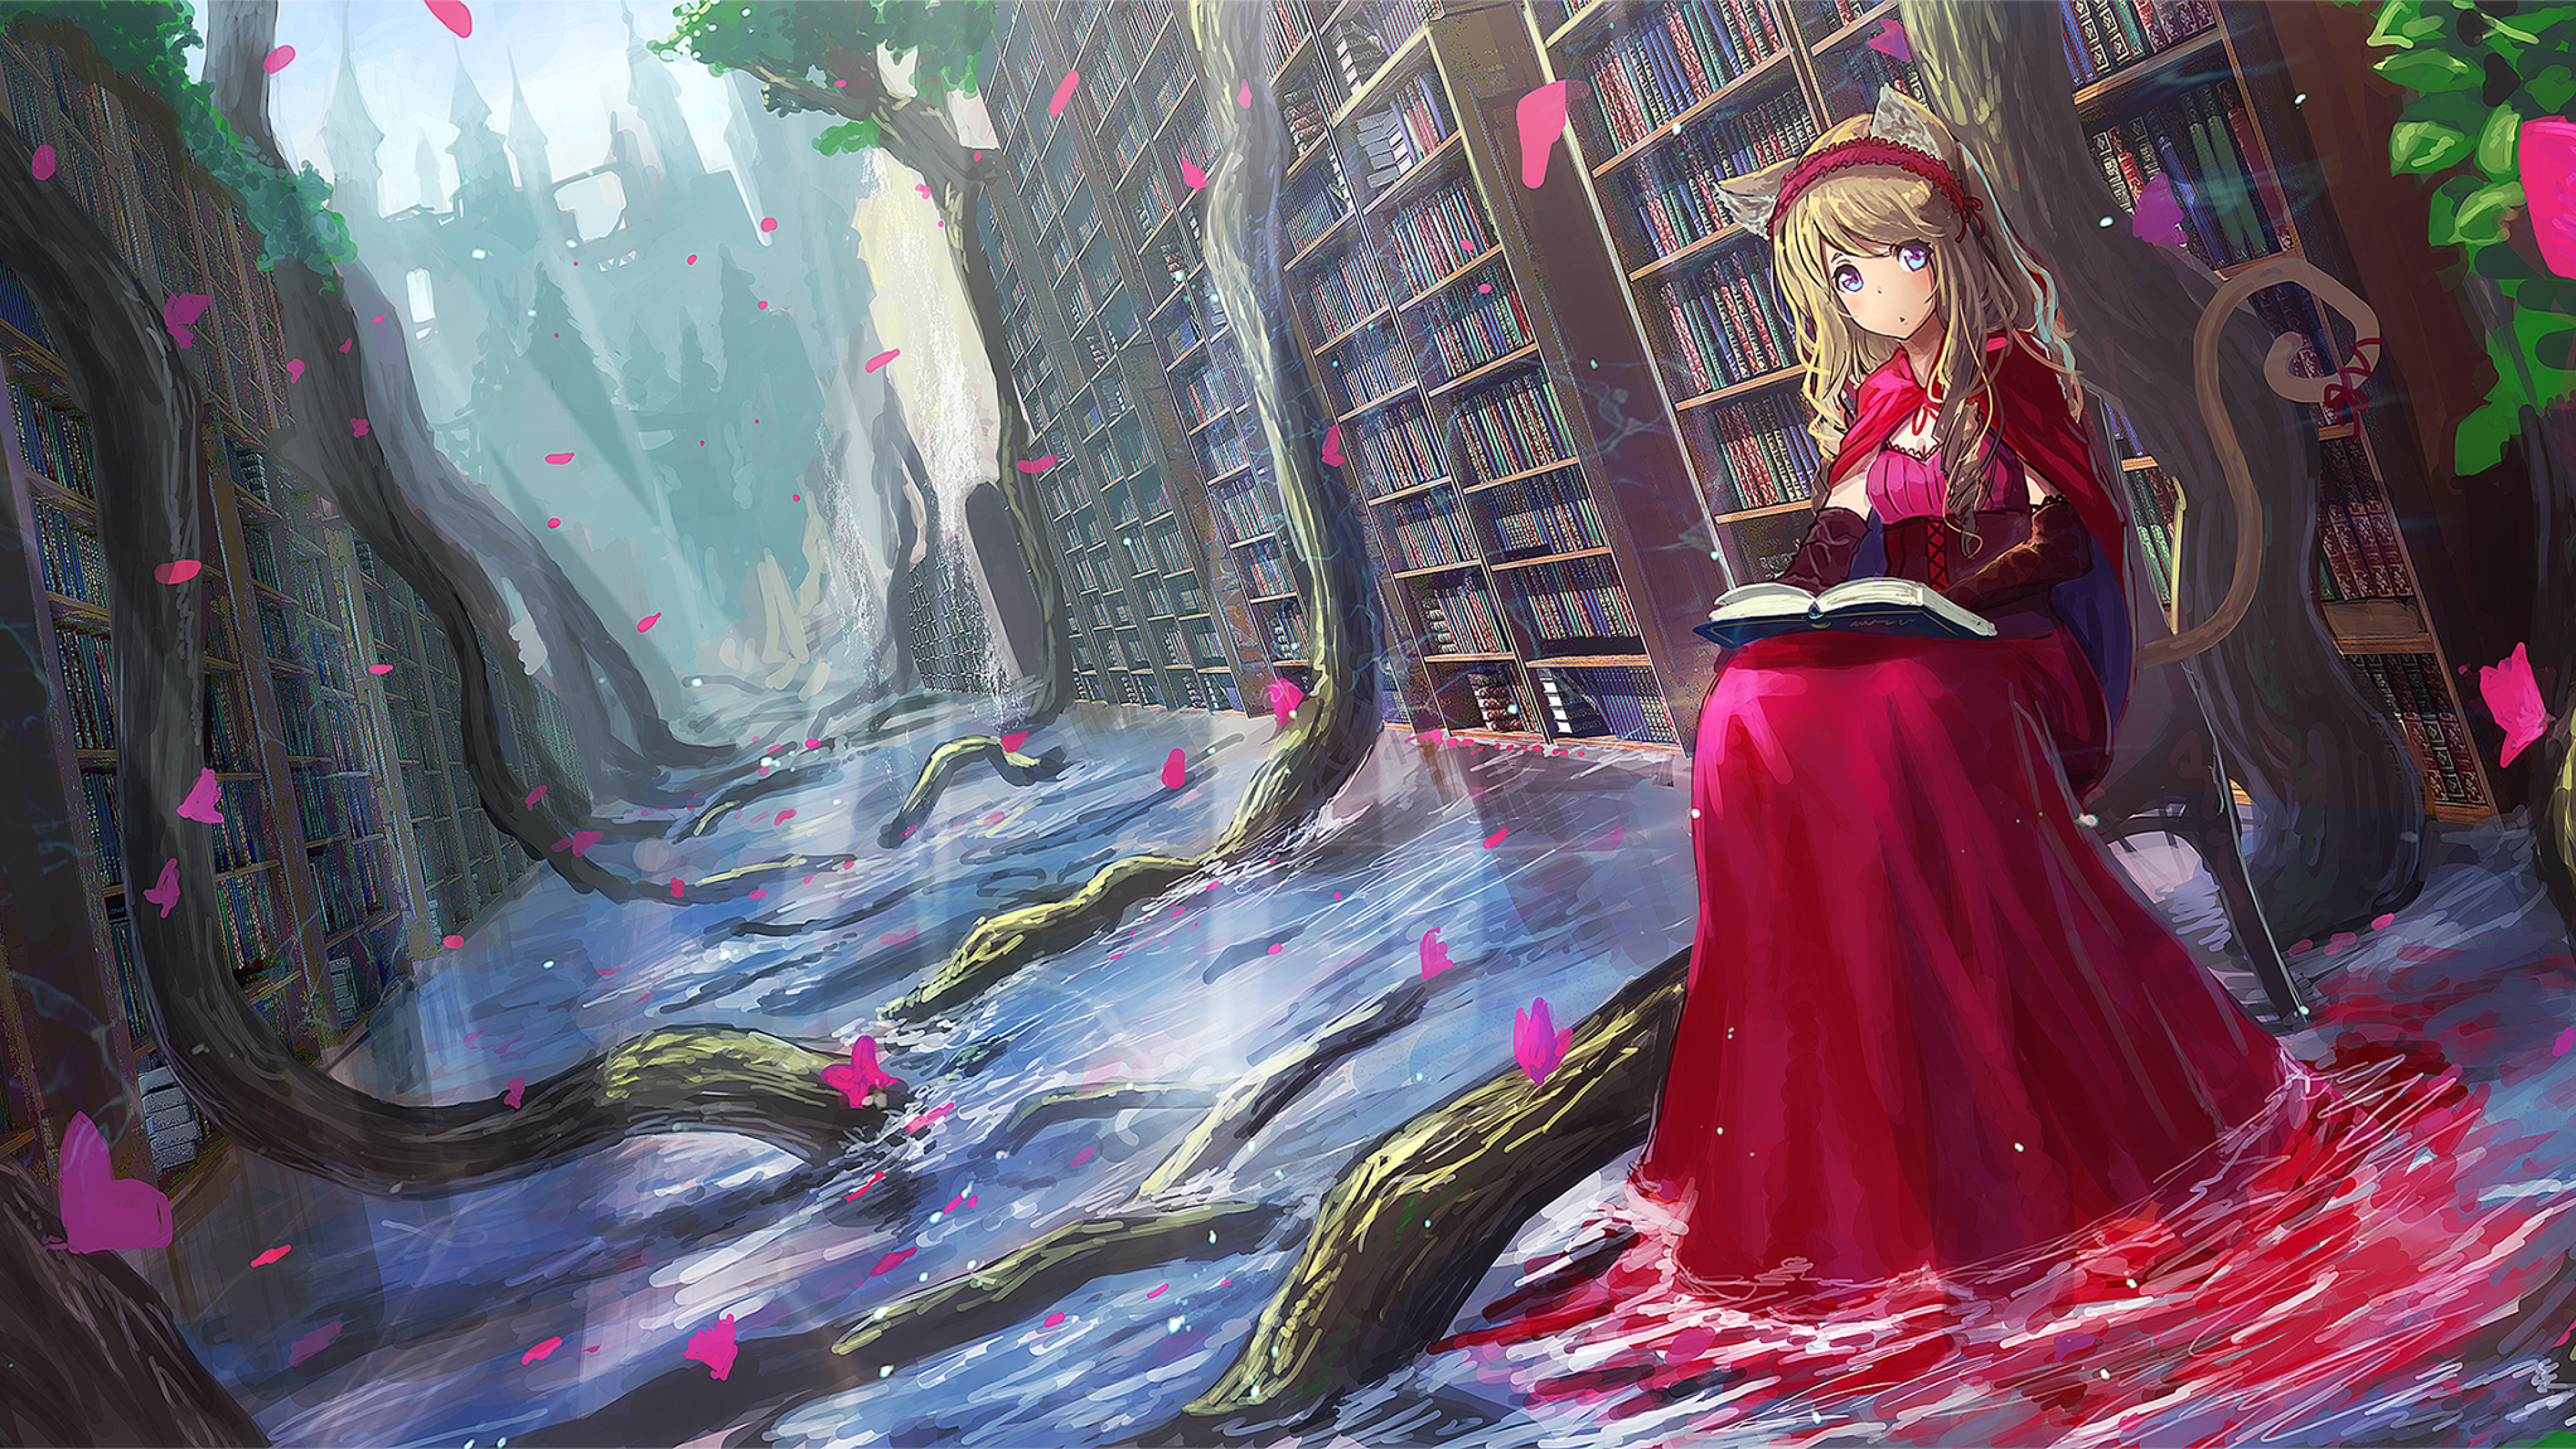 Download 3840x2160 Anime Girl, Animal Ears, Red Dress, Reading Book, Library, Landscape Wallpaper for UHD TV